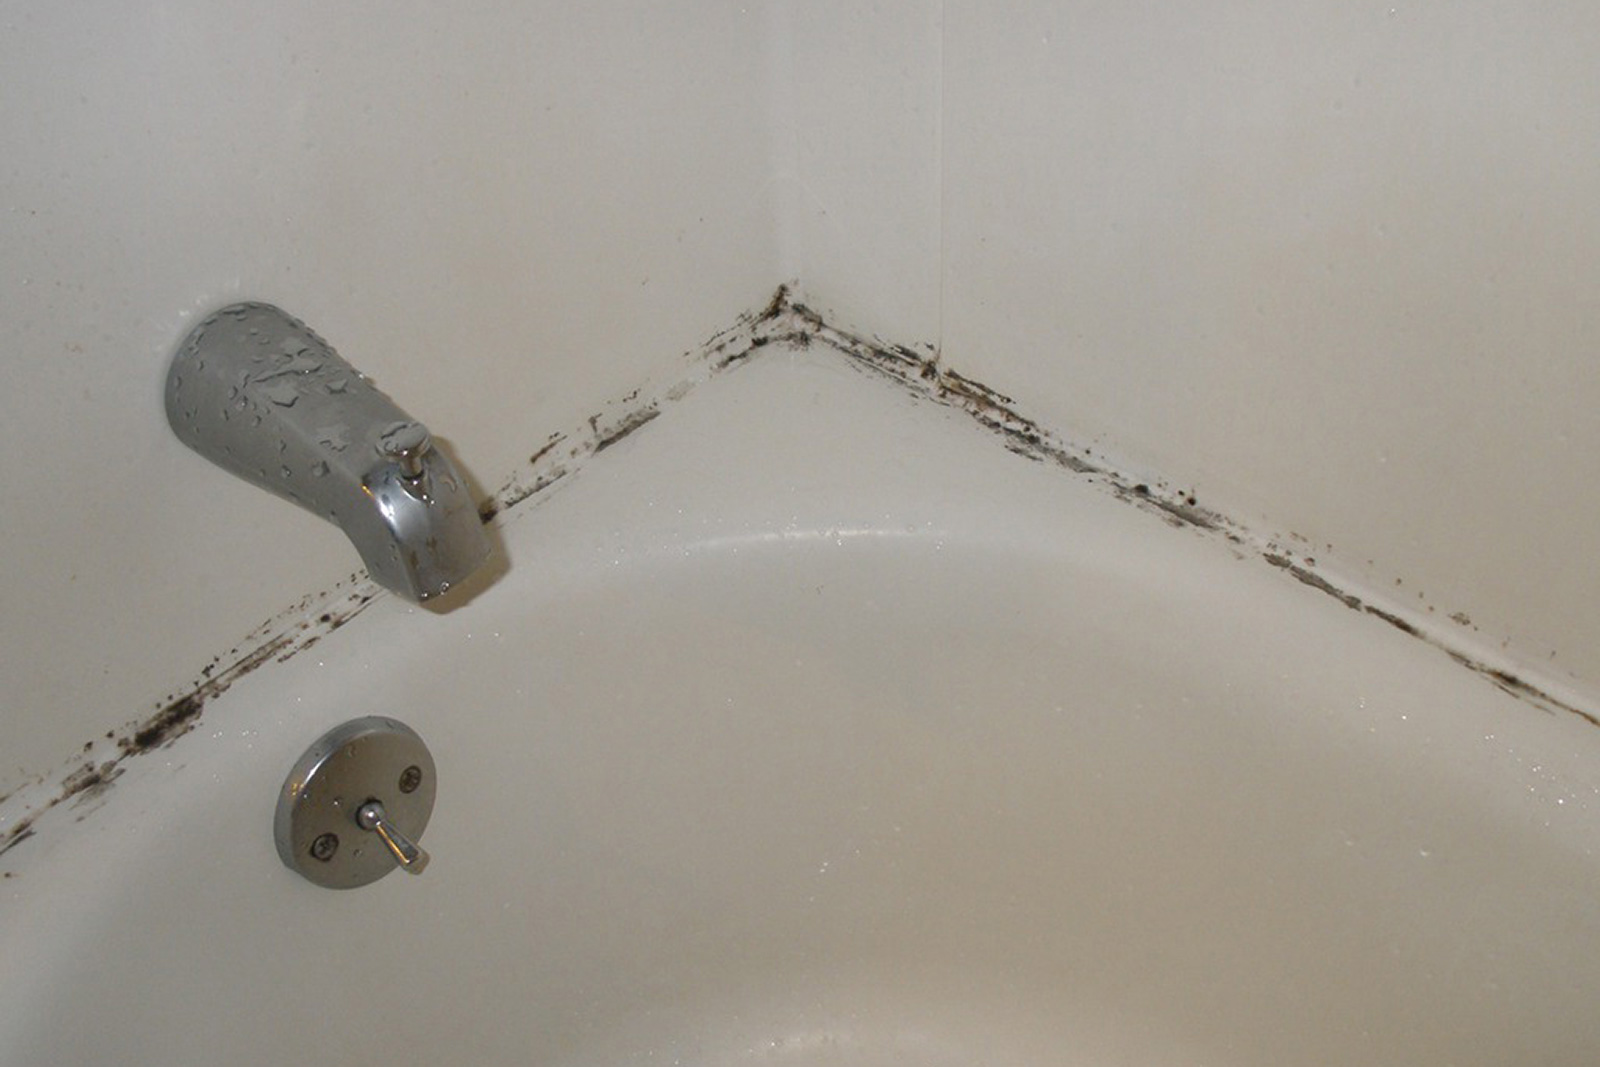 Bathroom Mold, How To Prevent Mold In Bathroom Grout